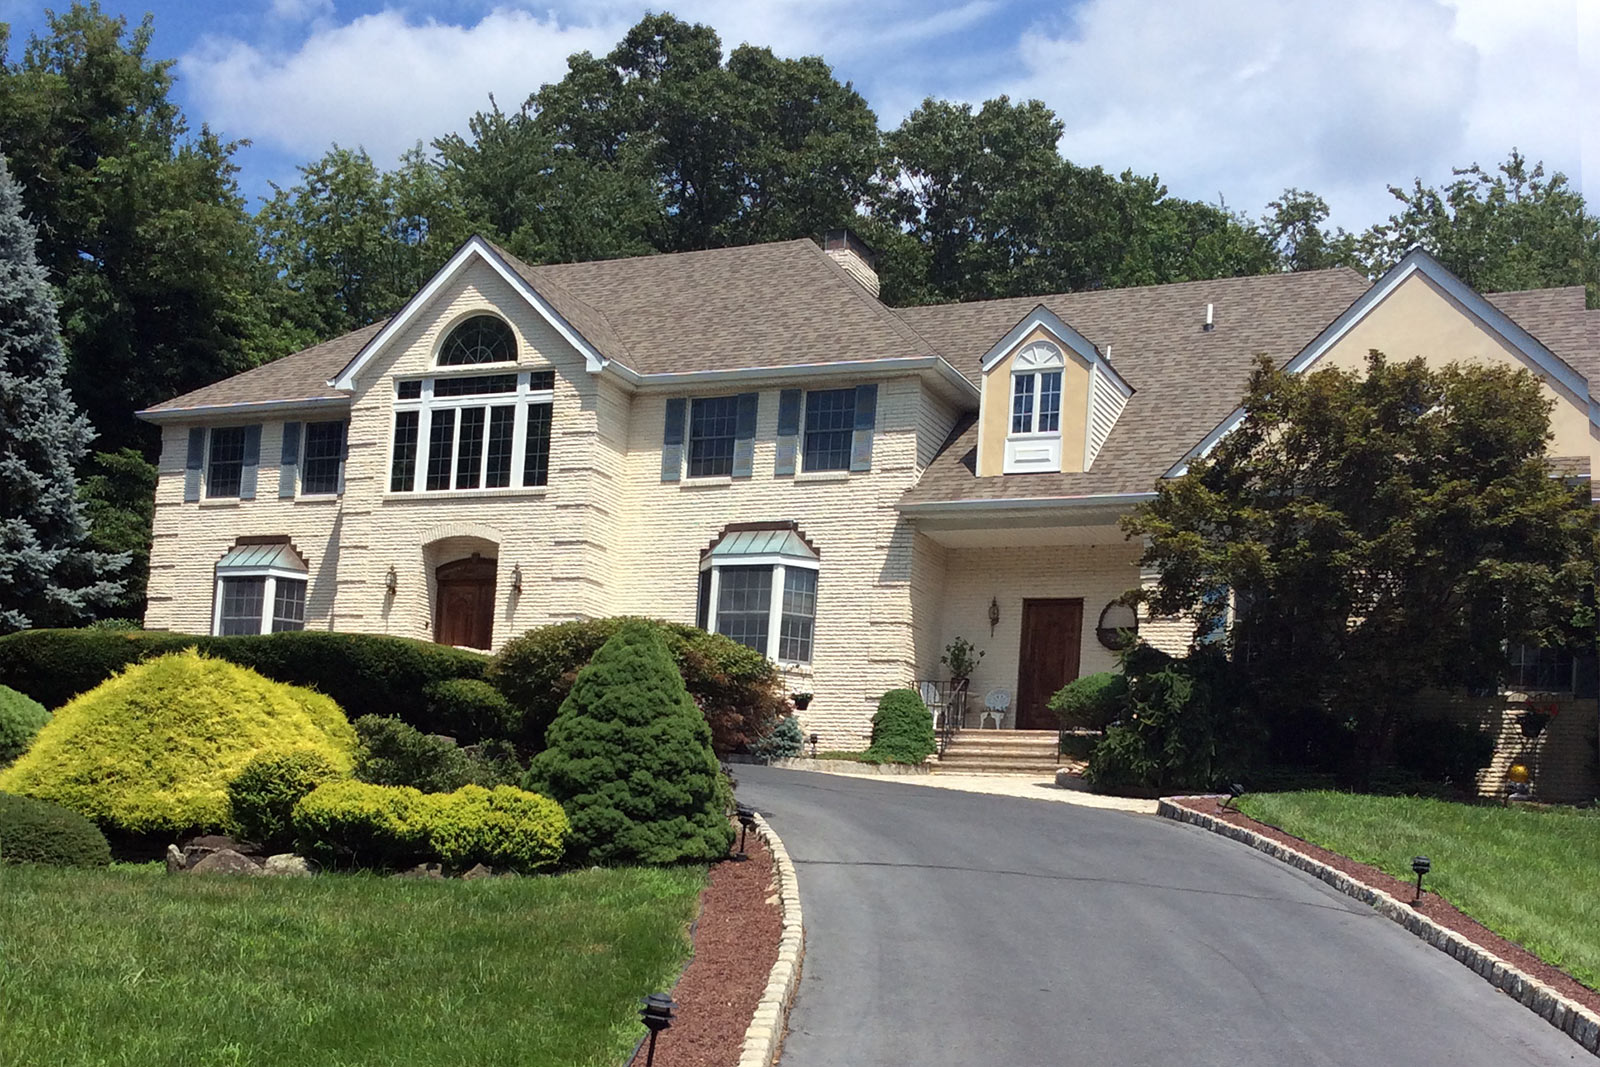 New Roof Installation and Repair in NJ